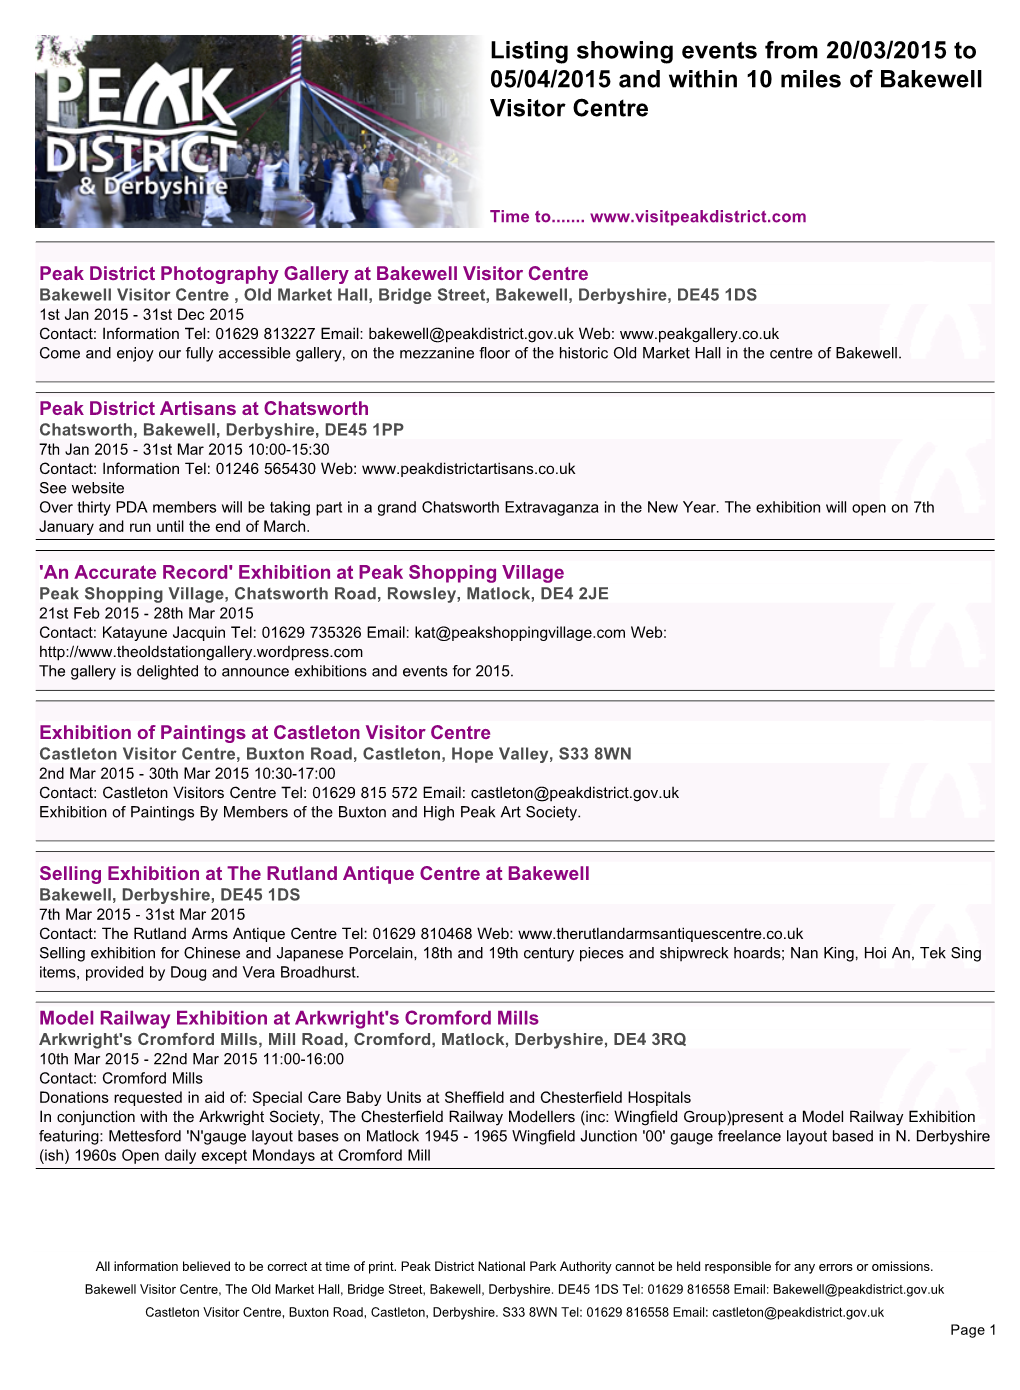 Listing Showing Events from 20/03/2015 to 05/04/2015 and Within 10 Miles of Bakewell Visitor Centre